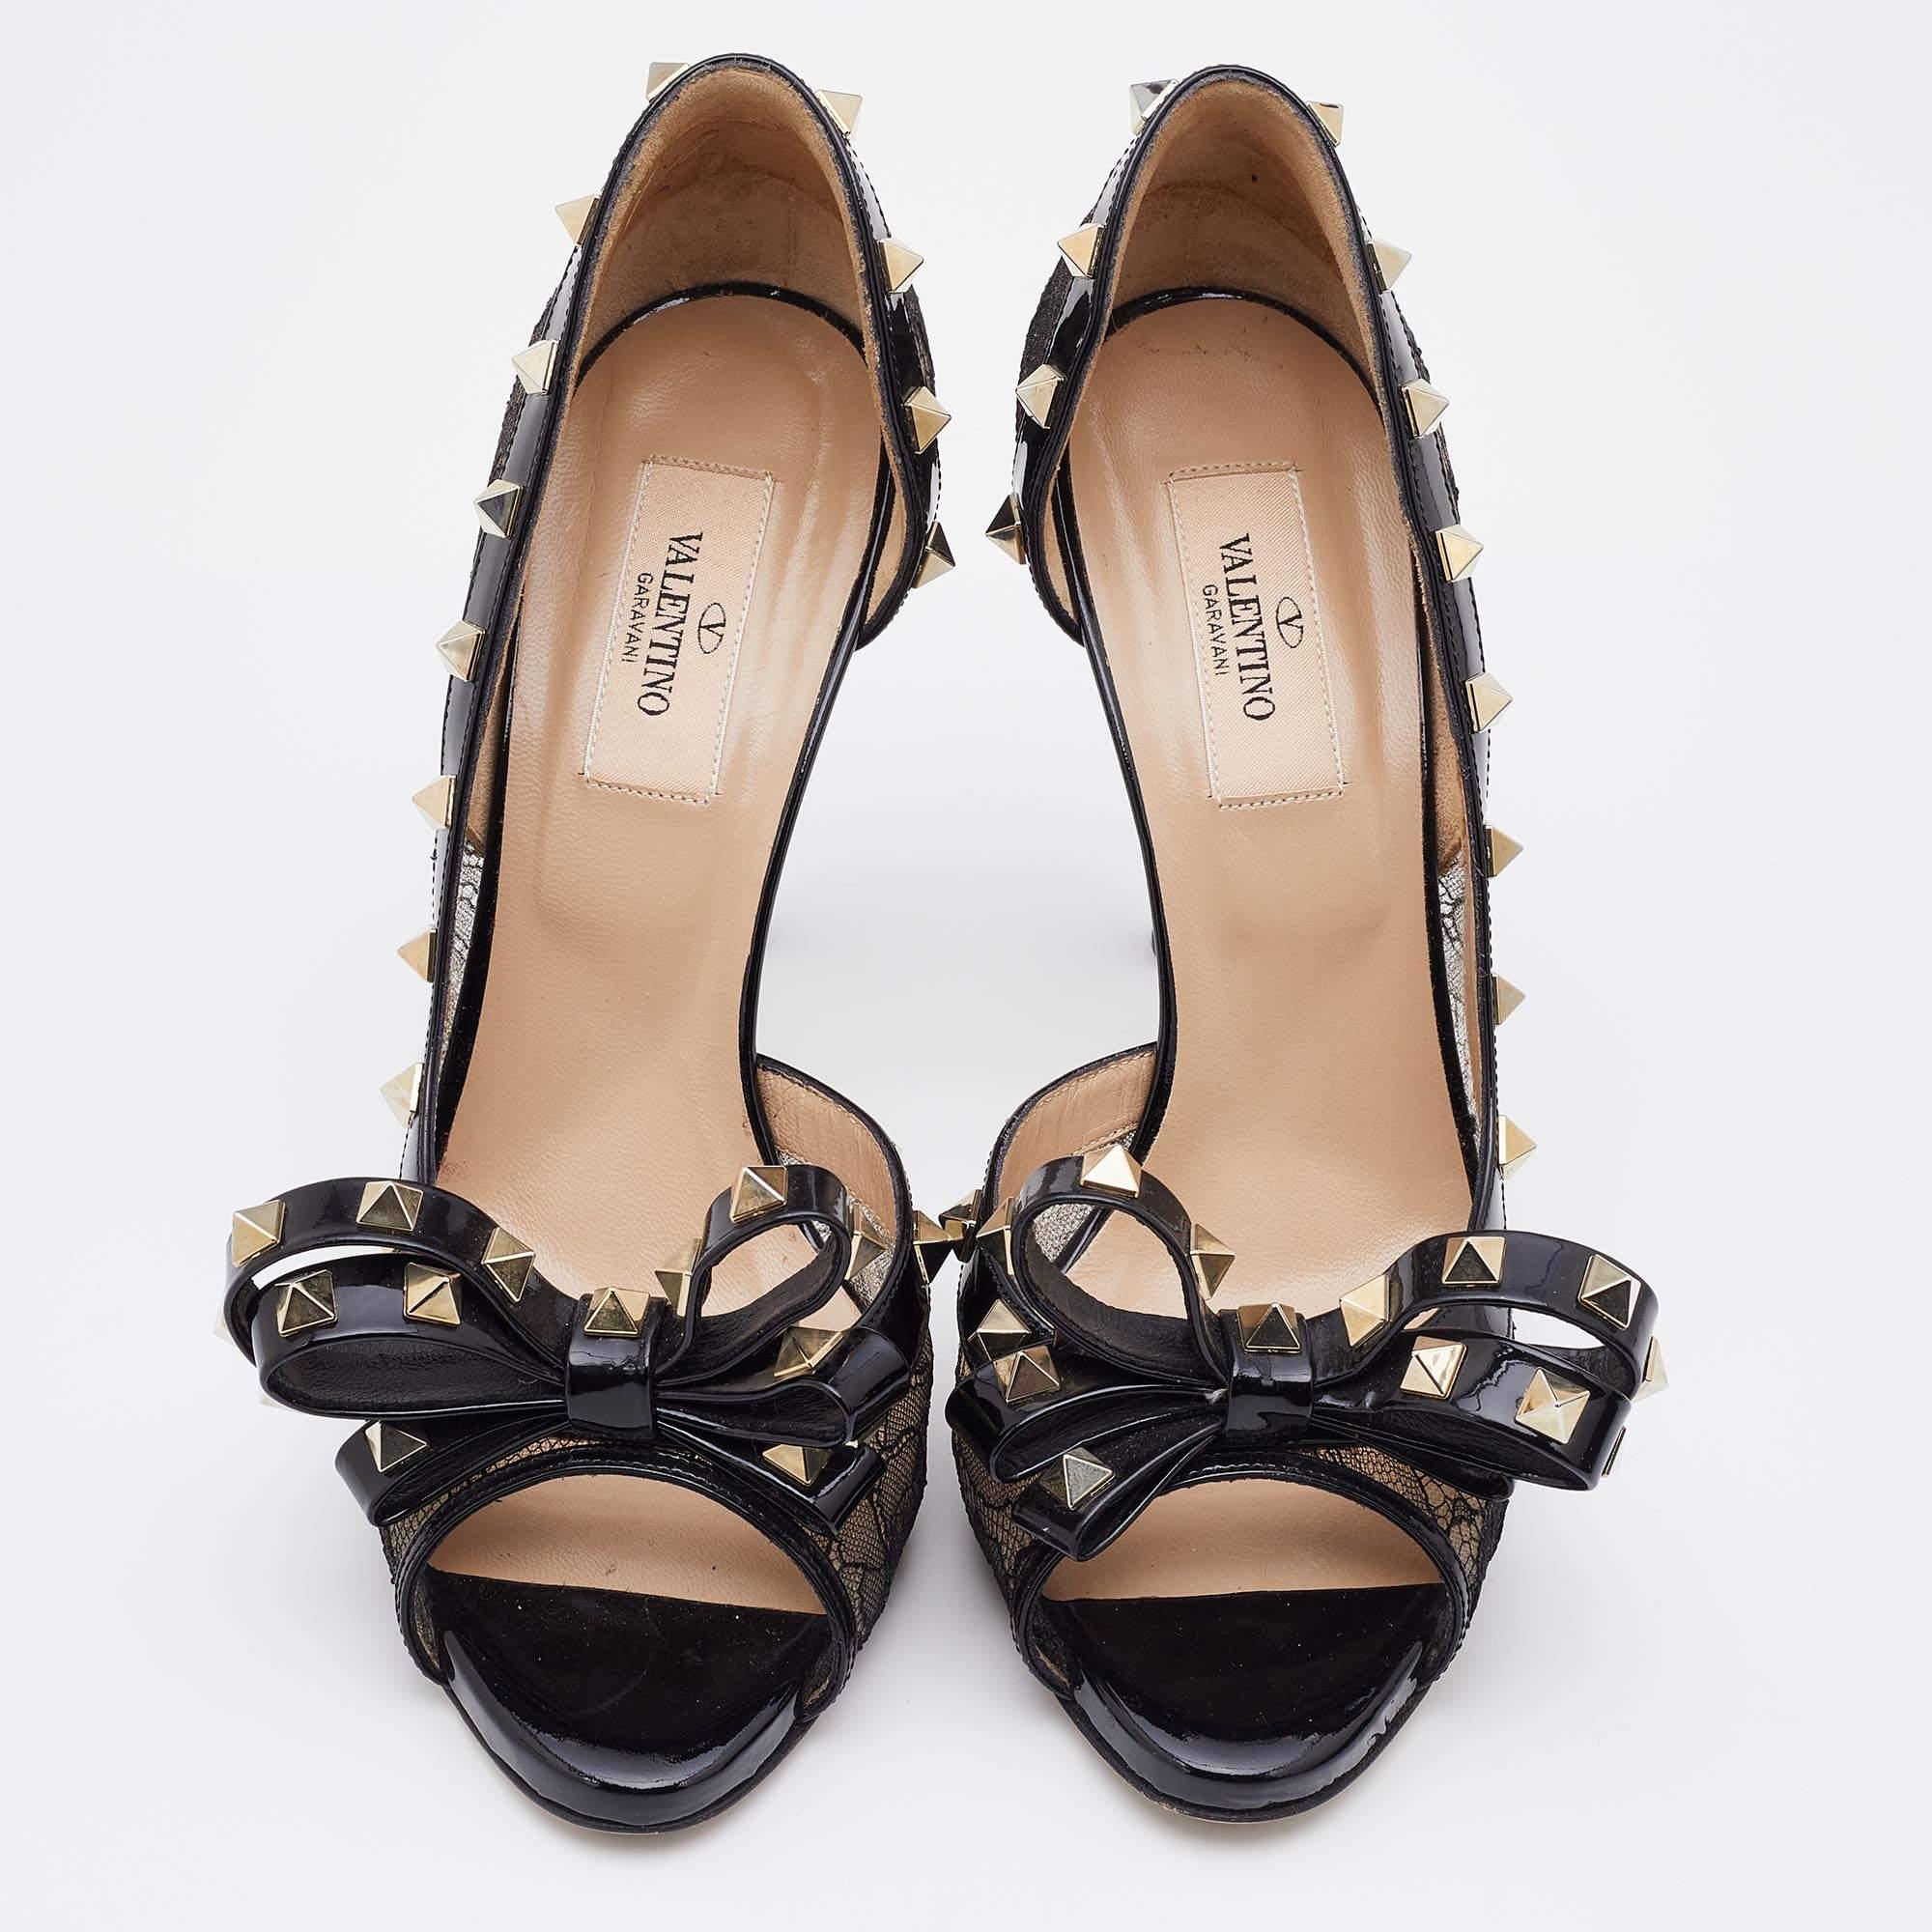 The fashion house’s tradition of excellence, coupled with modern design sensibilities, works to make these pumps a fabulous choice. They'll help you deliver a chic look with ease.

Includes
Original Dustbag